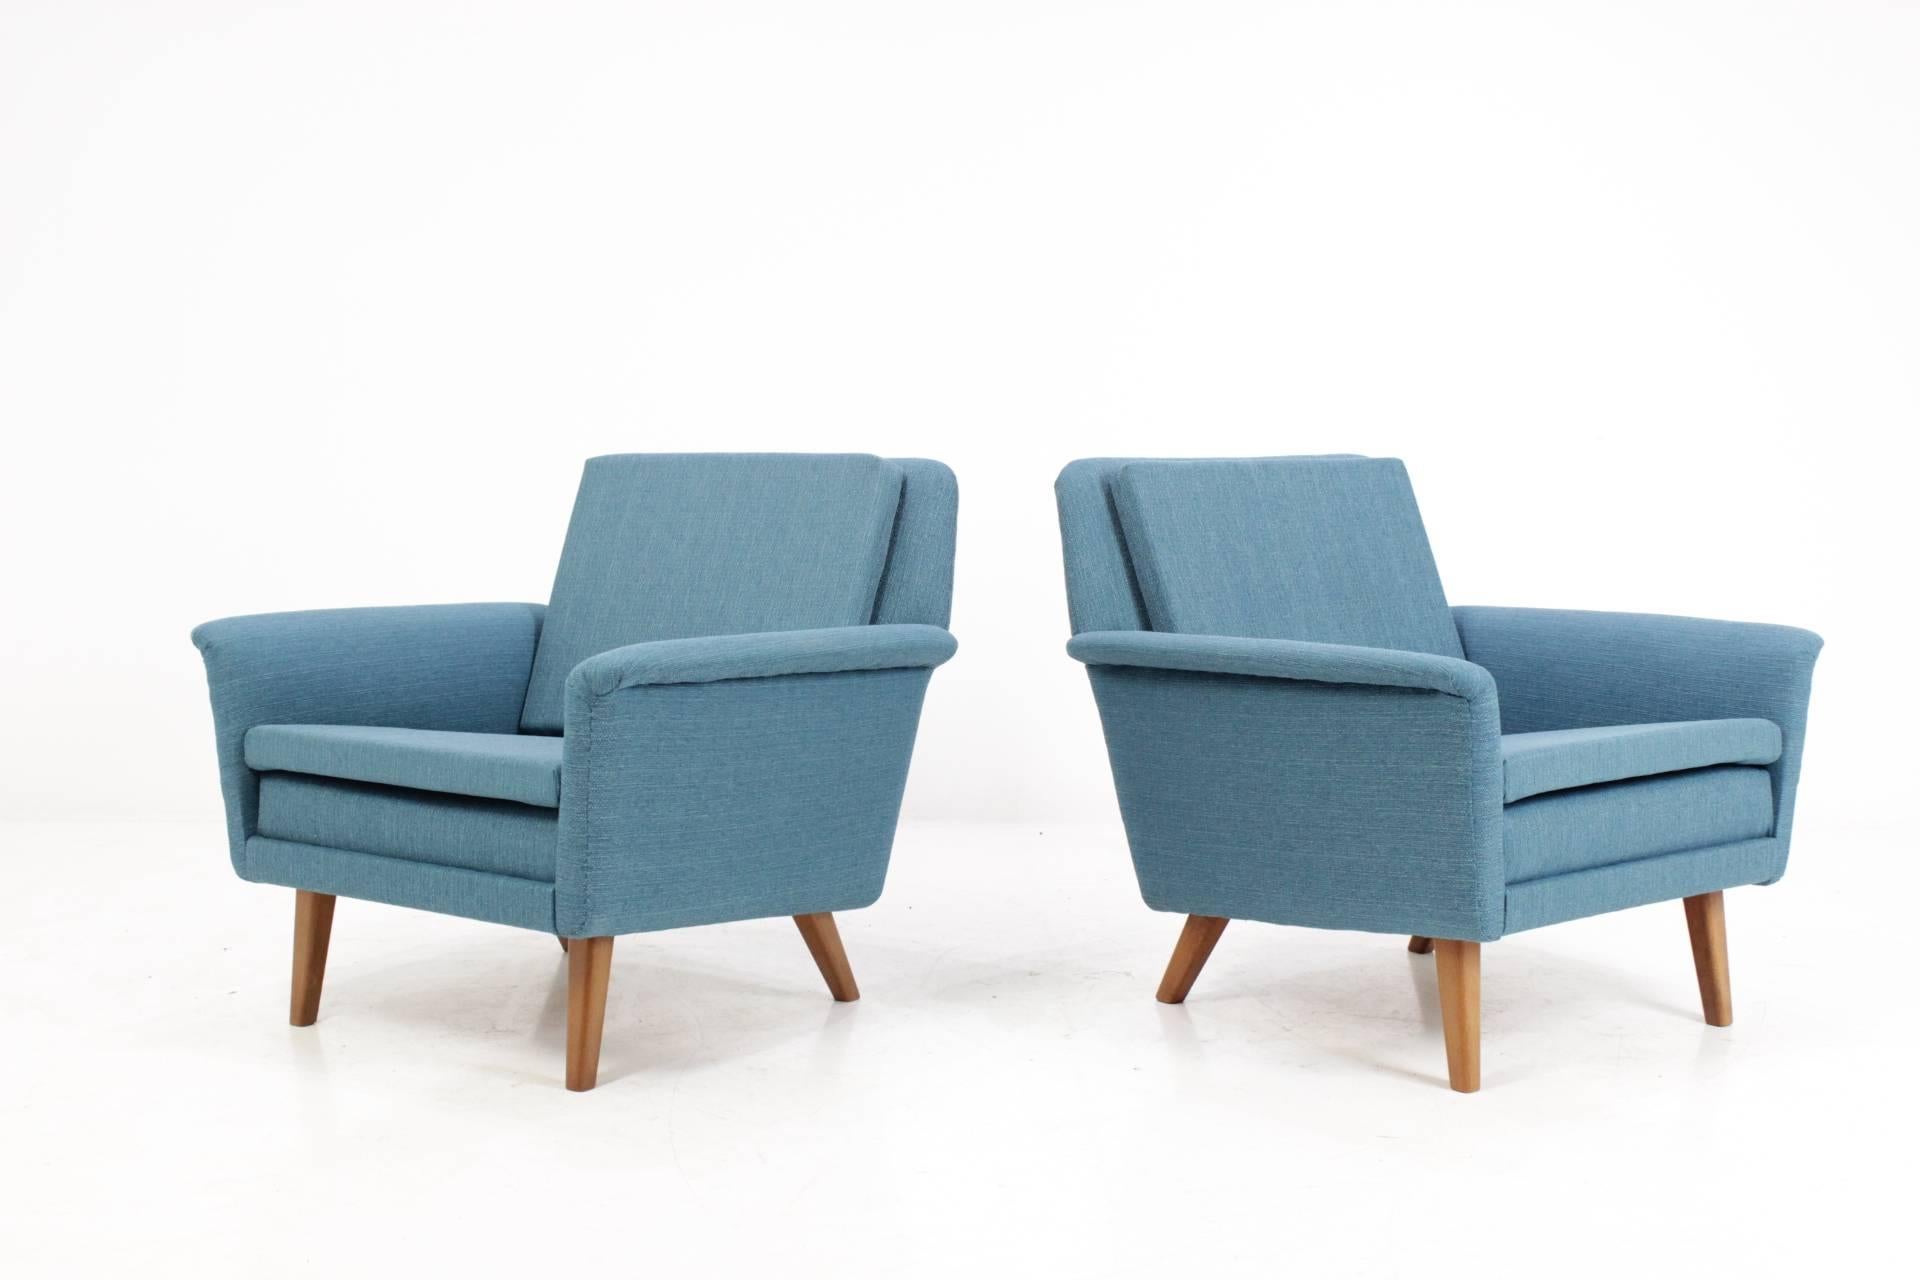 Pair of two Folke Ohlsson lounge chairs. Both chairs were newly upholstered with quality fabric upholstery. Manufactured by Fritz Hansen in circa 1960s. Very good restored condition.